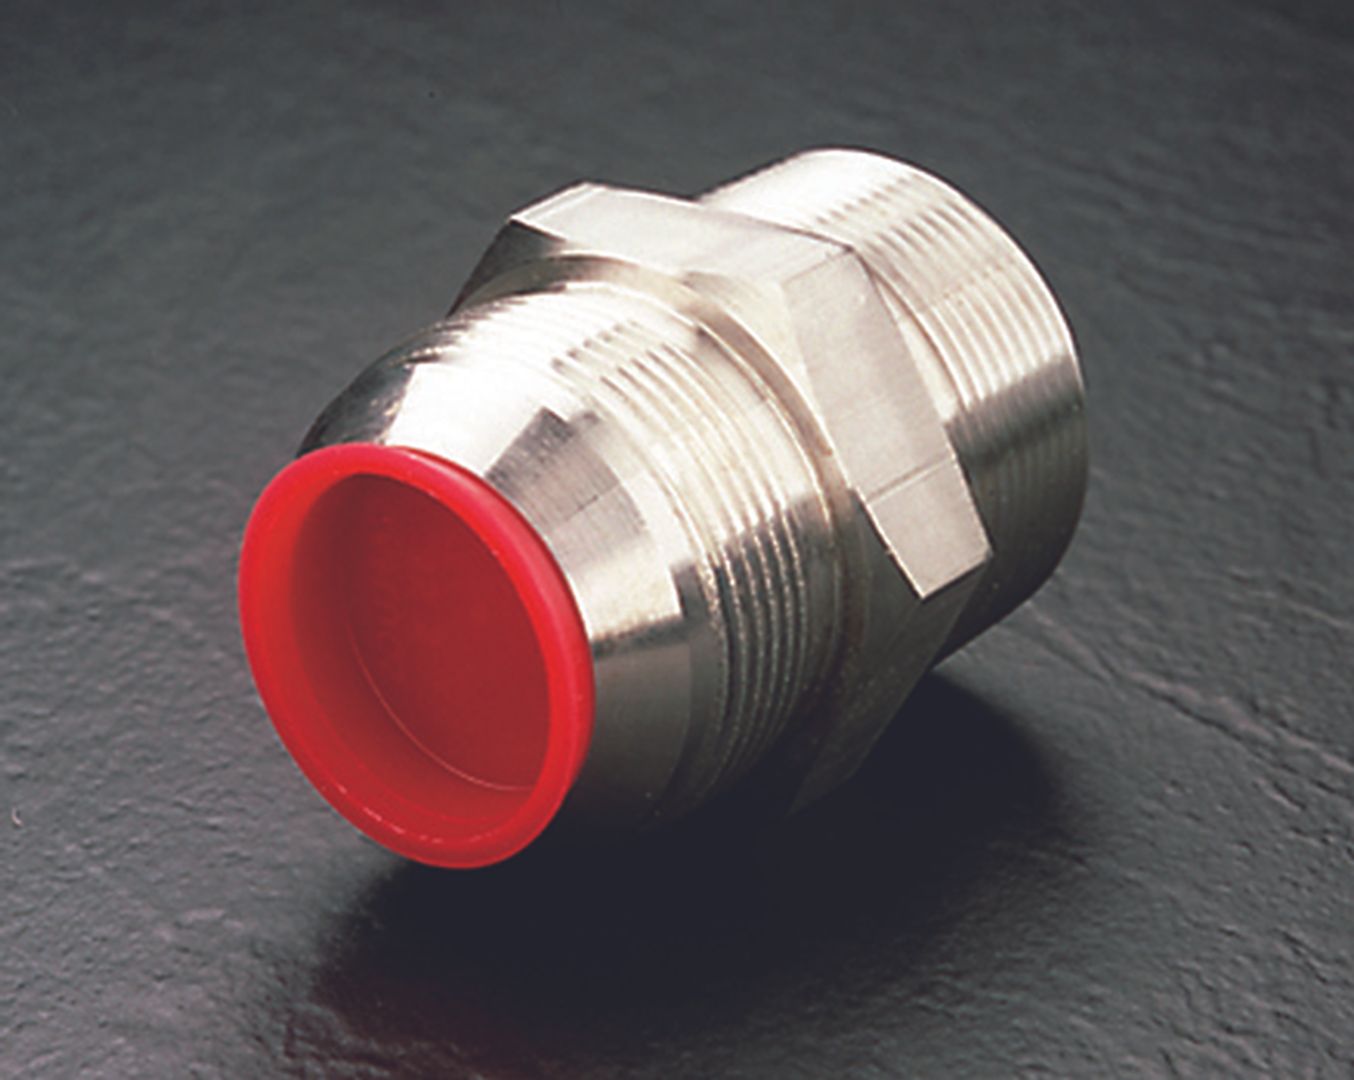 Caps 1/2”  MPT or Plugs 0.78” to 0.90” diameter hole Caplugs T-11X Red 